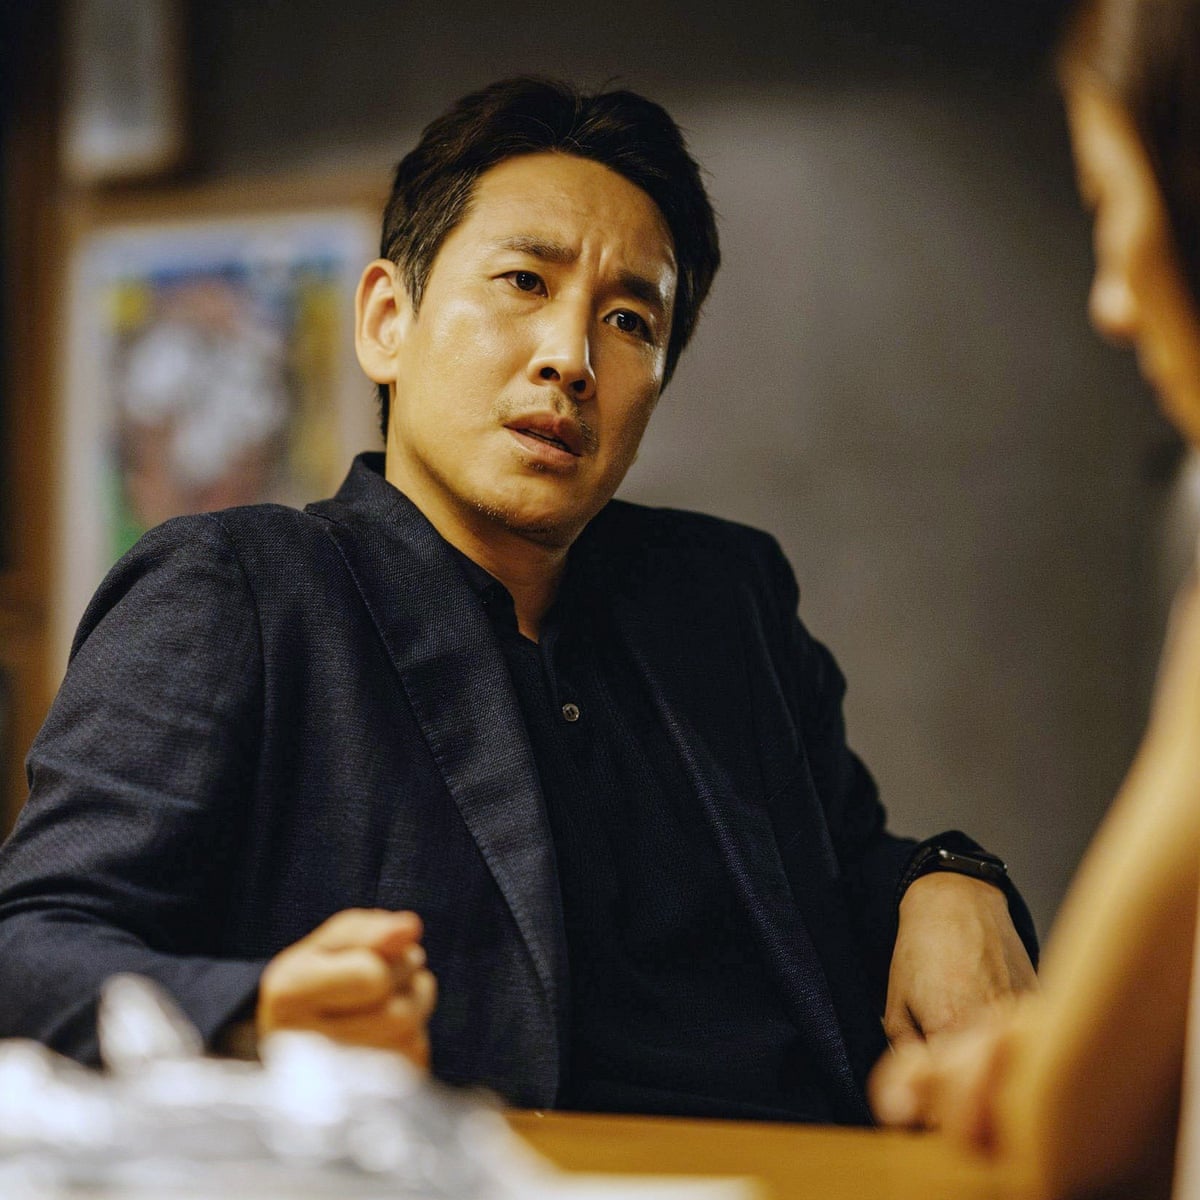 The loss of actor Lee Sun-kyun casts a chill shadow over Korea's film world  | Movies | The Guardian